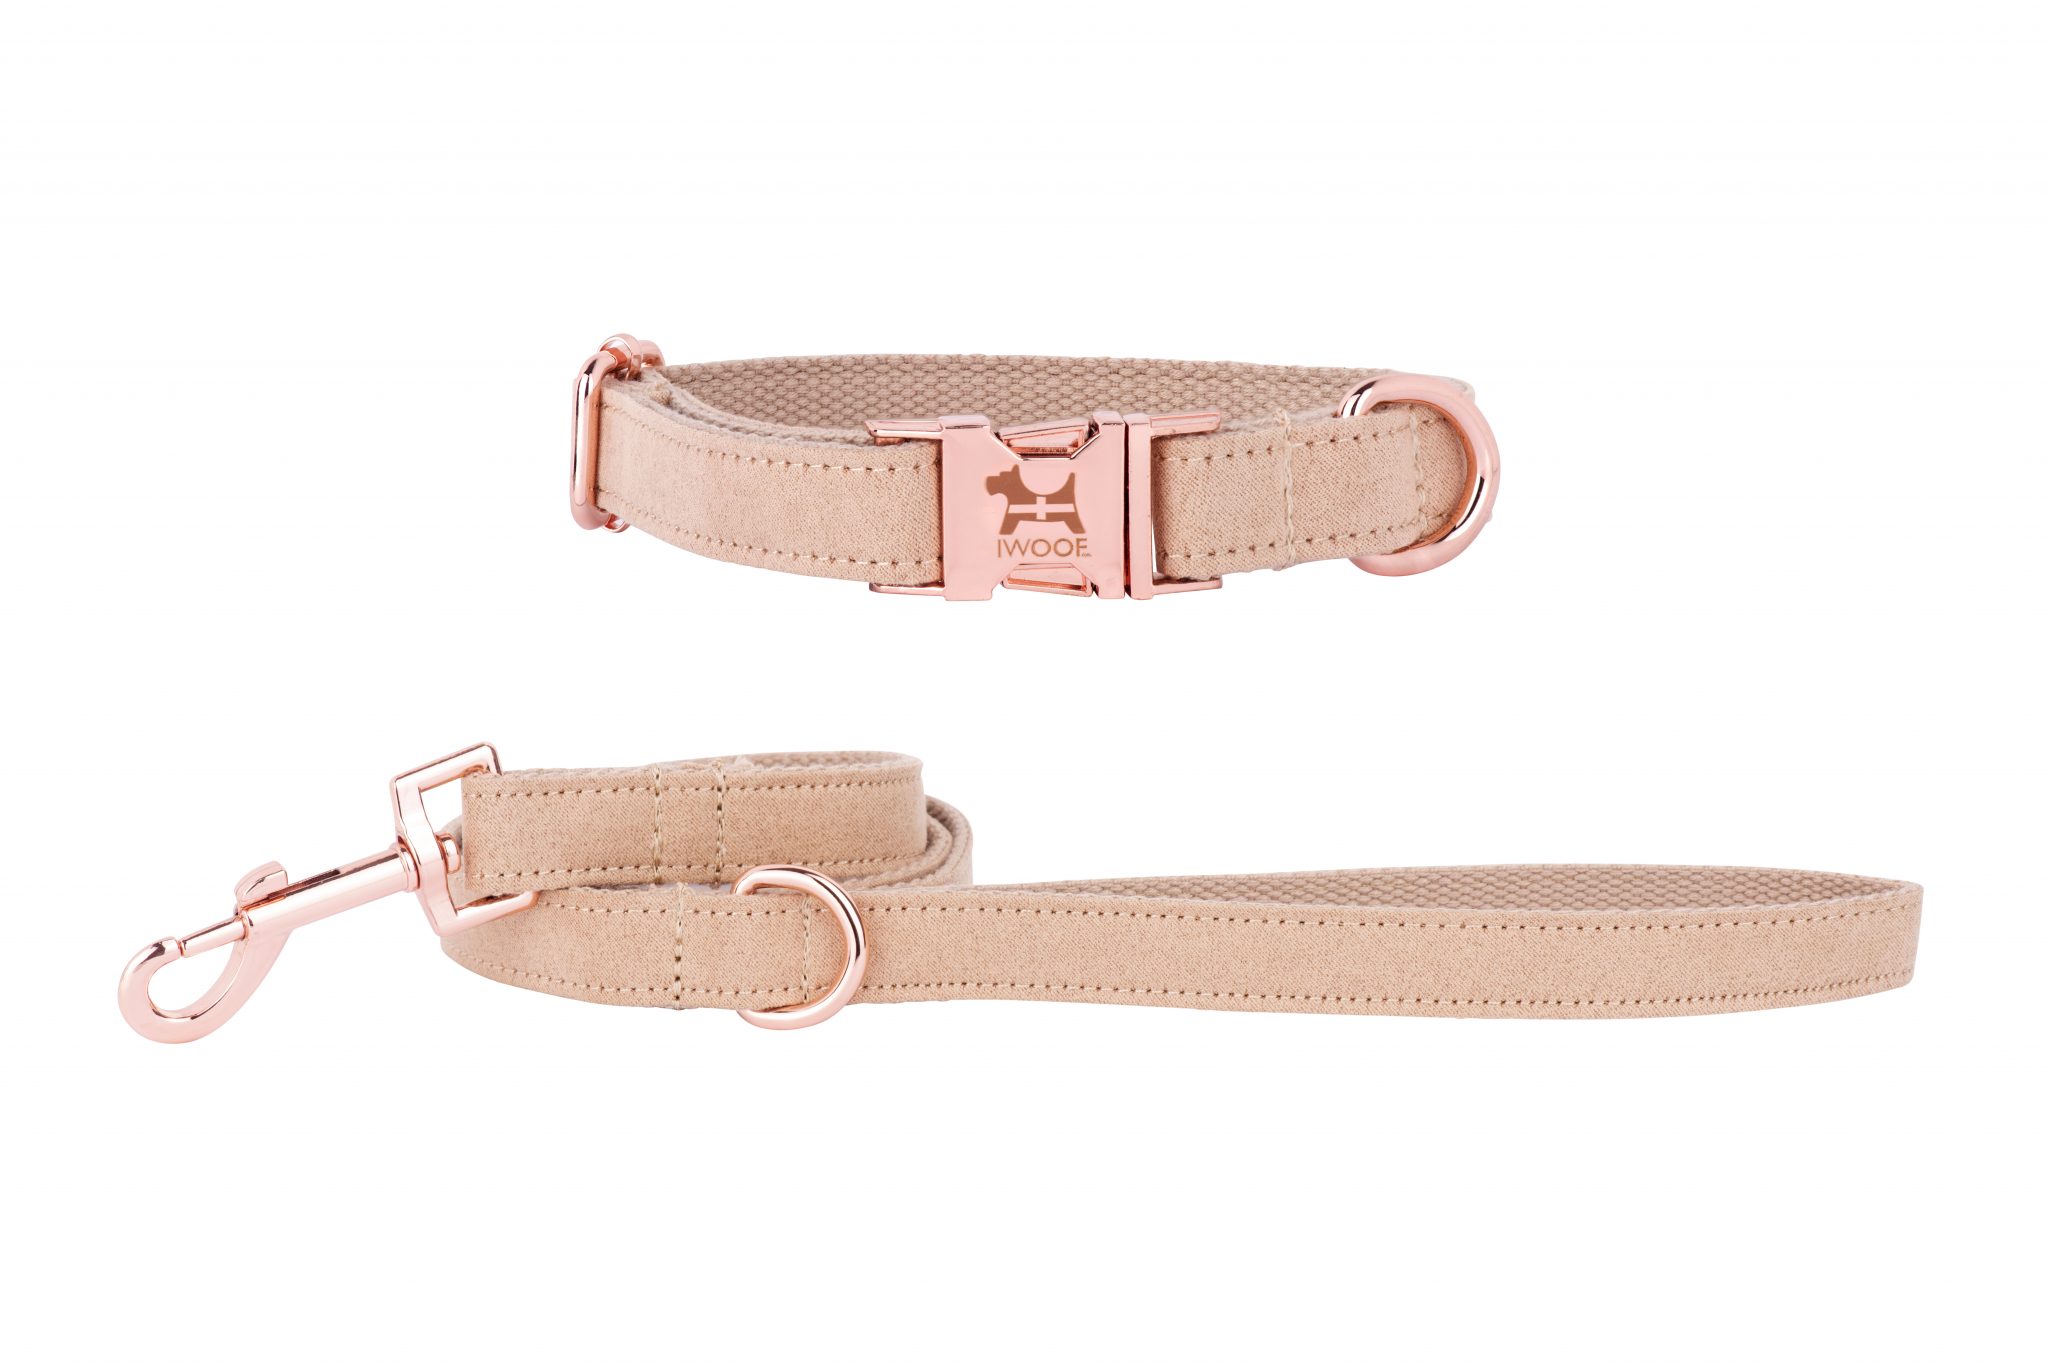 Cornish Sand designer dog collar and lead by IWOOF in Rose Gold